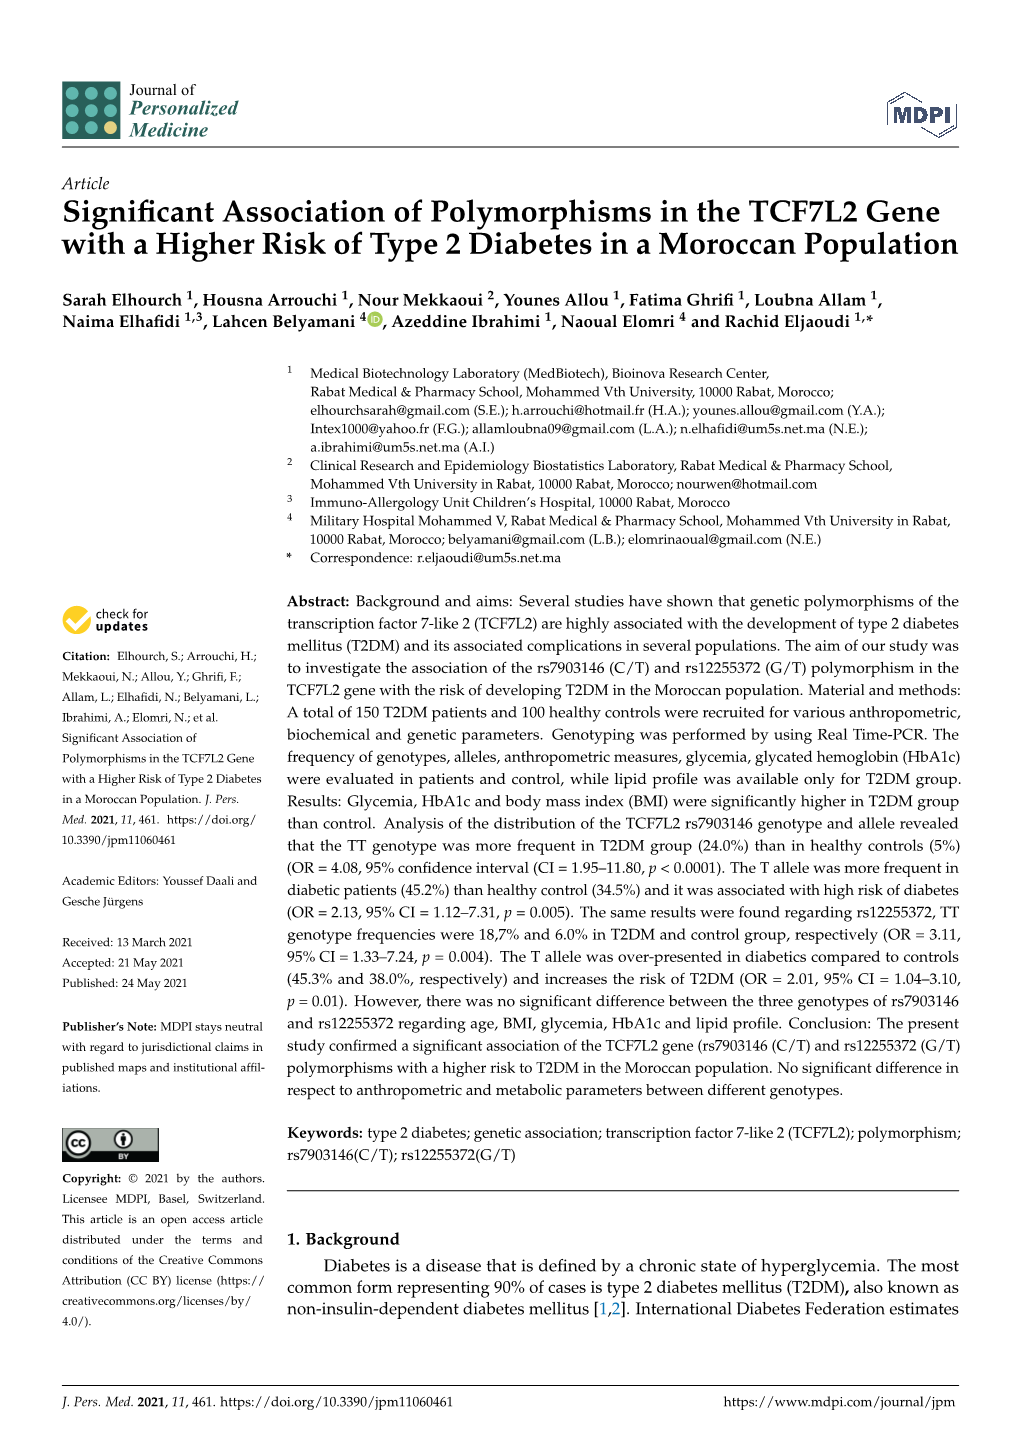 Significant Association of Polymorphisms in the TCF7L2 Gene with a Higher Risk of Type 2 Diabetes in a Moroccan Population